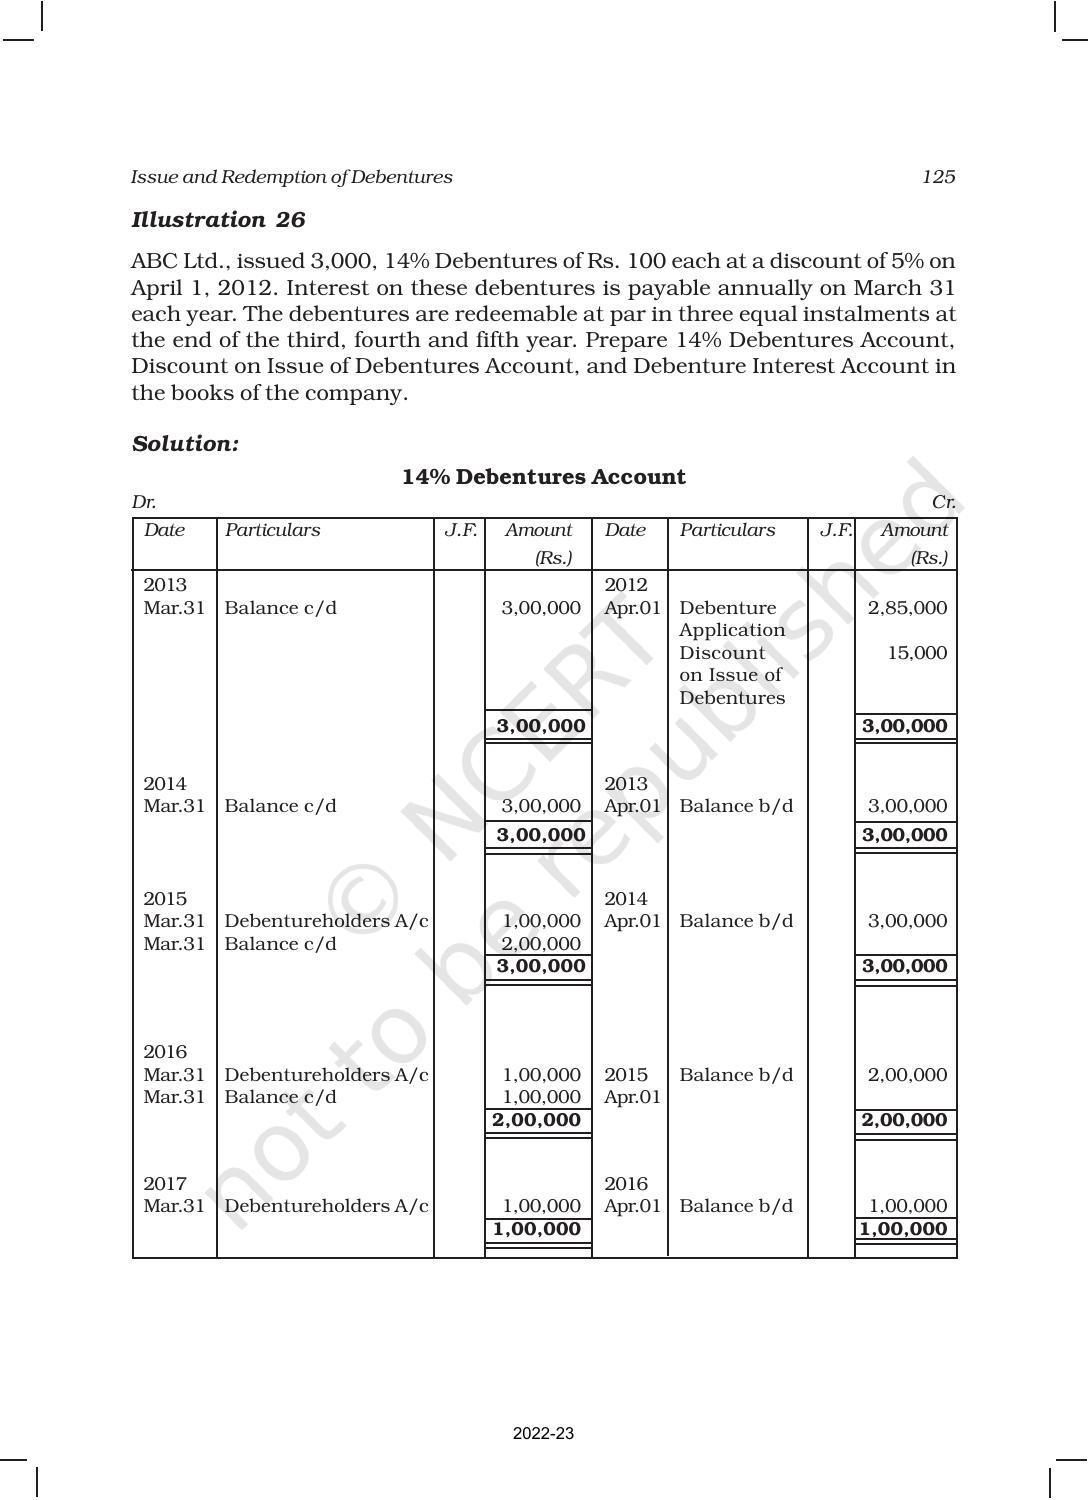 NCERT Book for Class 12 Accountancy Part II Chapter 1 Issue and Redemption of Debentures - Page 51